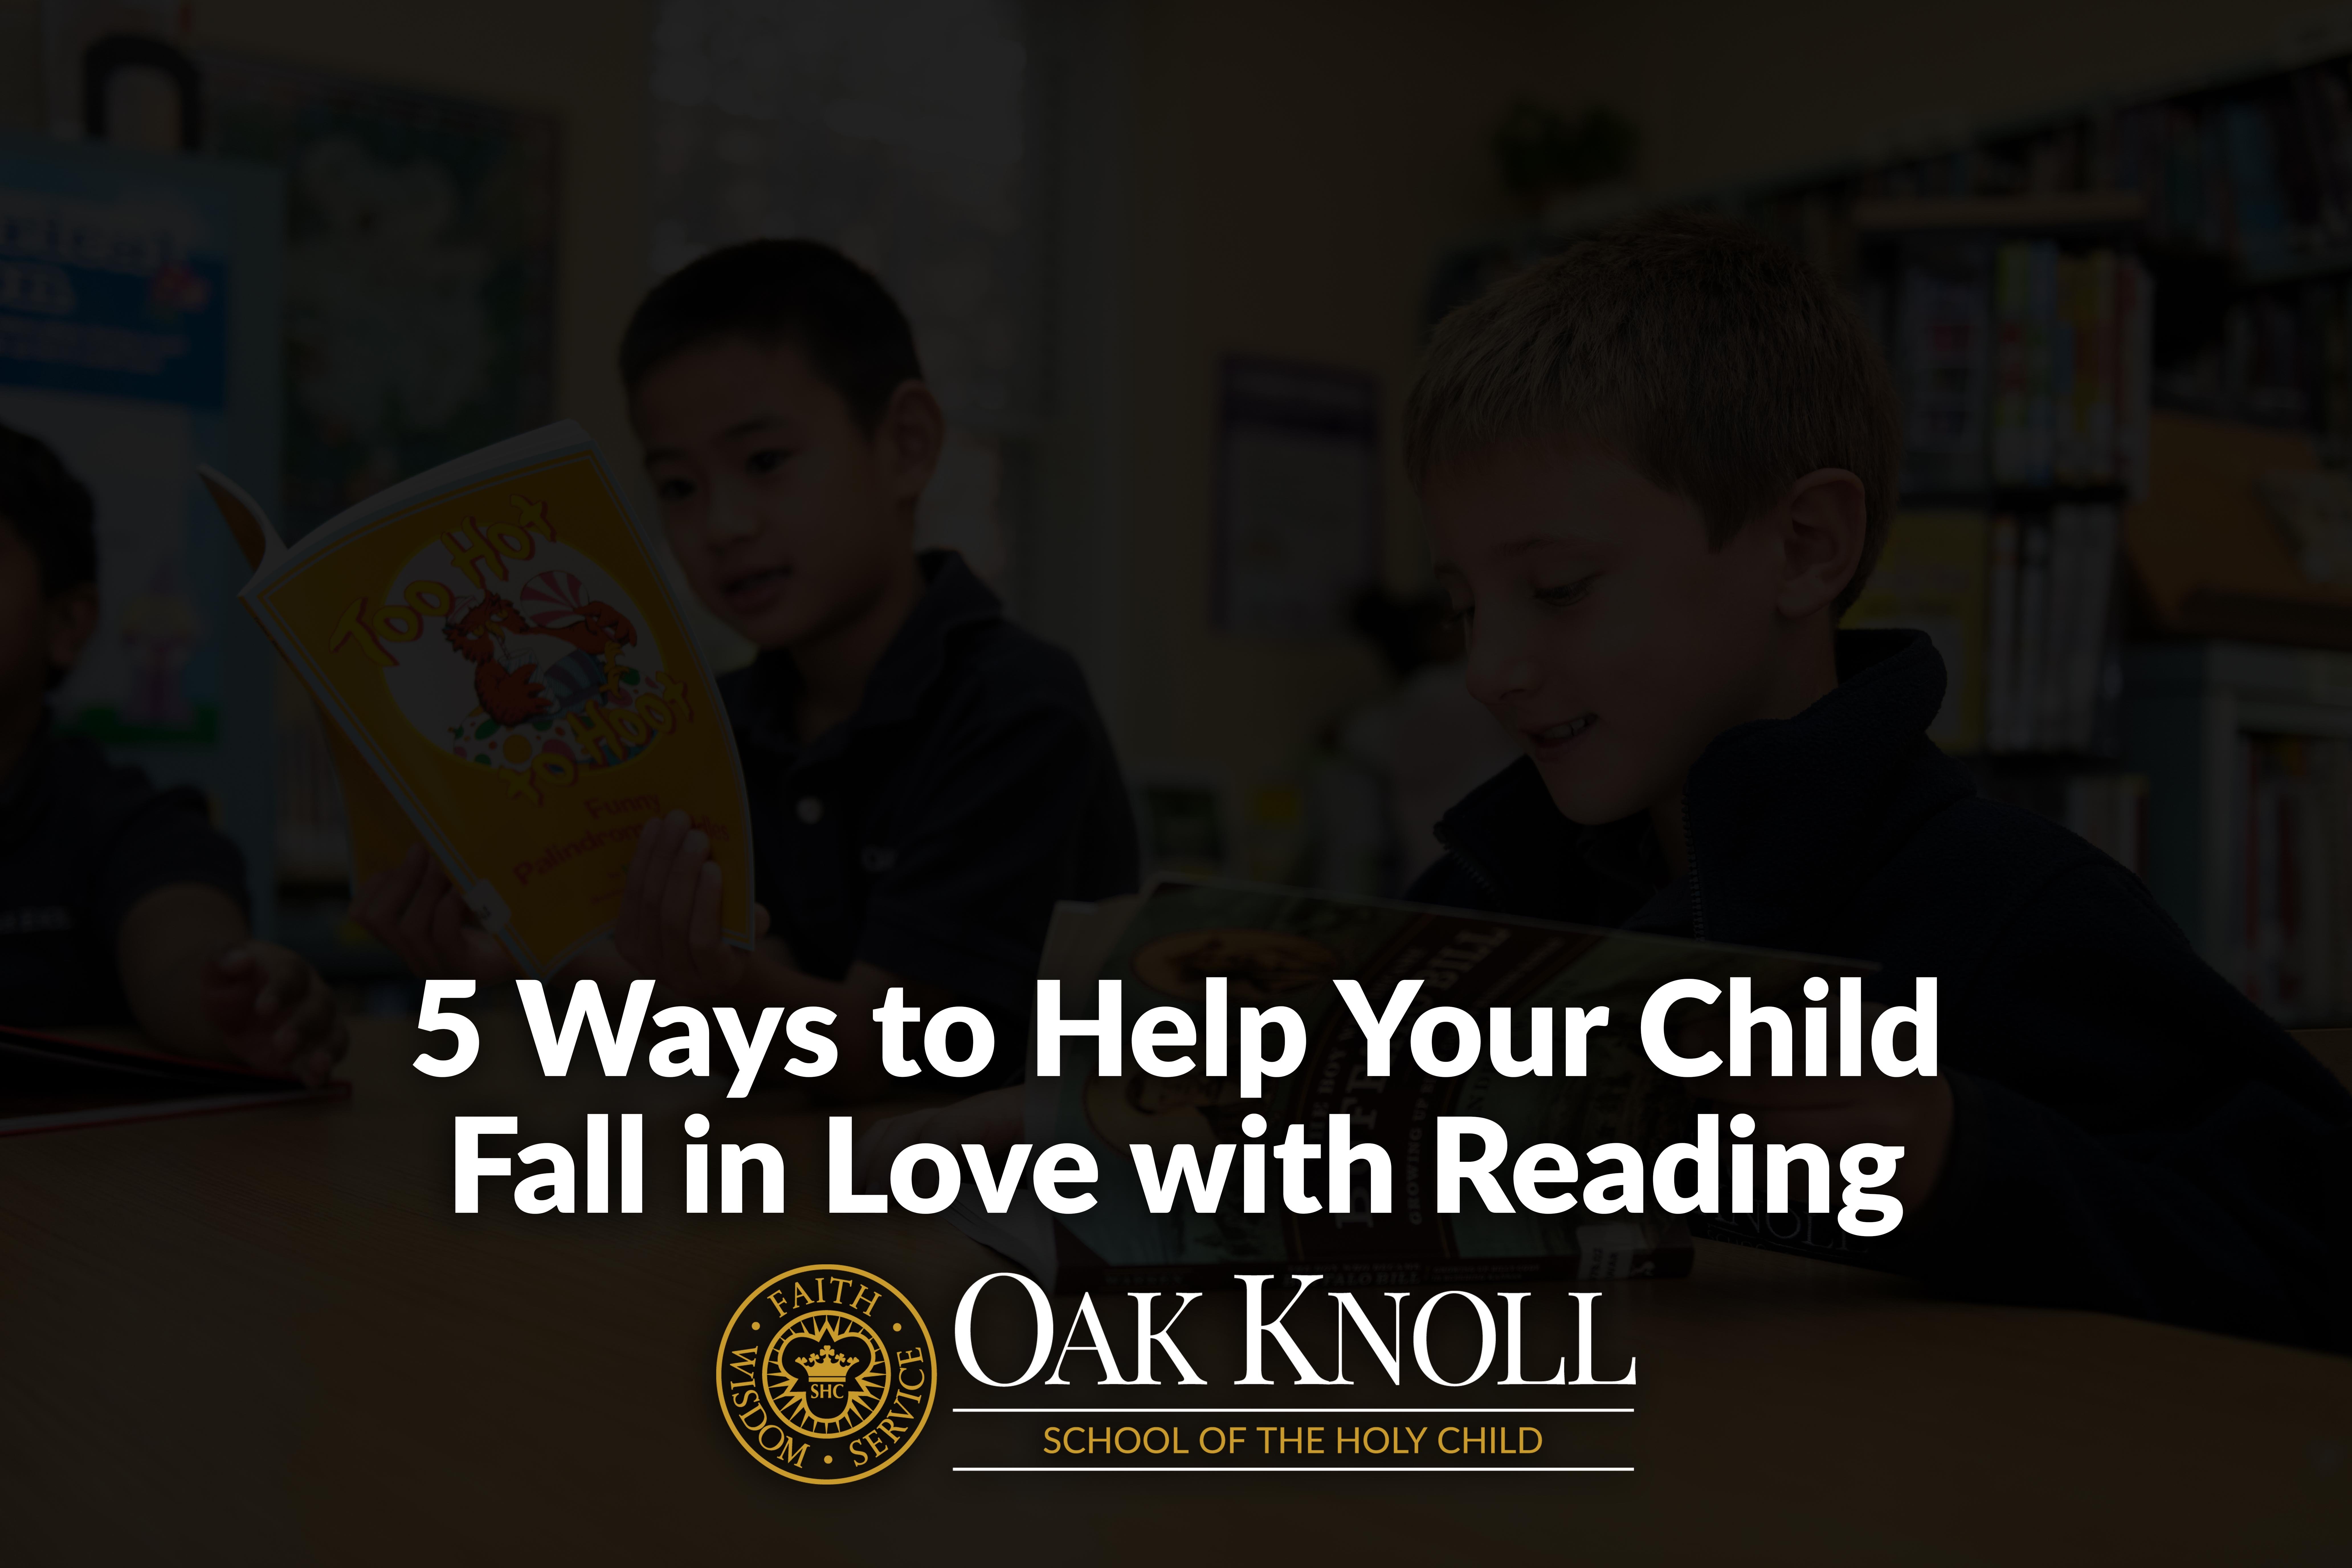 5 Ways to Help Your Child Fall in Love with Reading